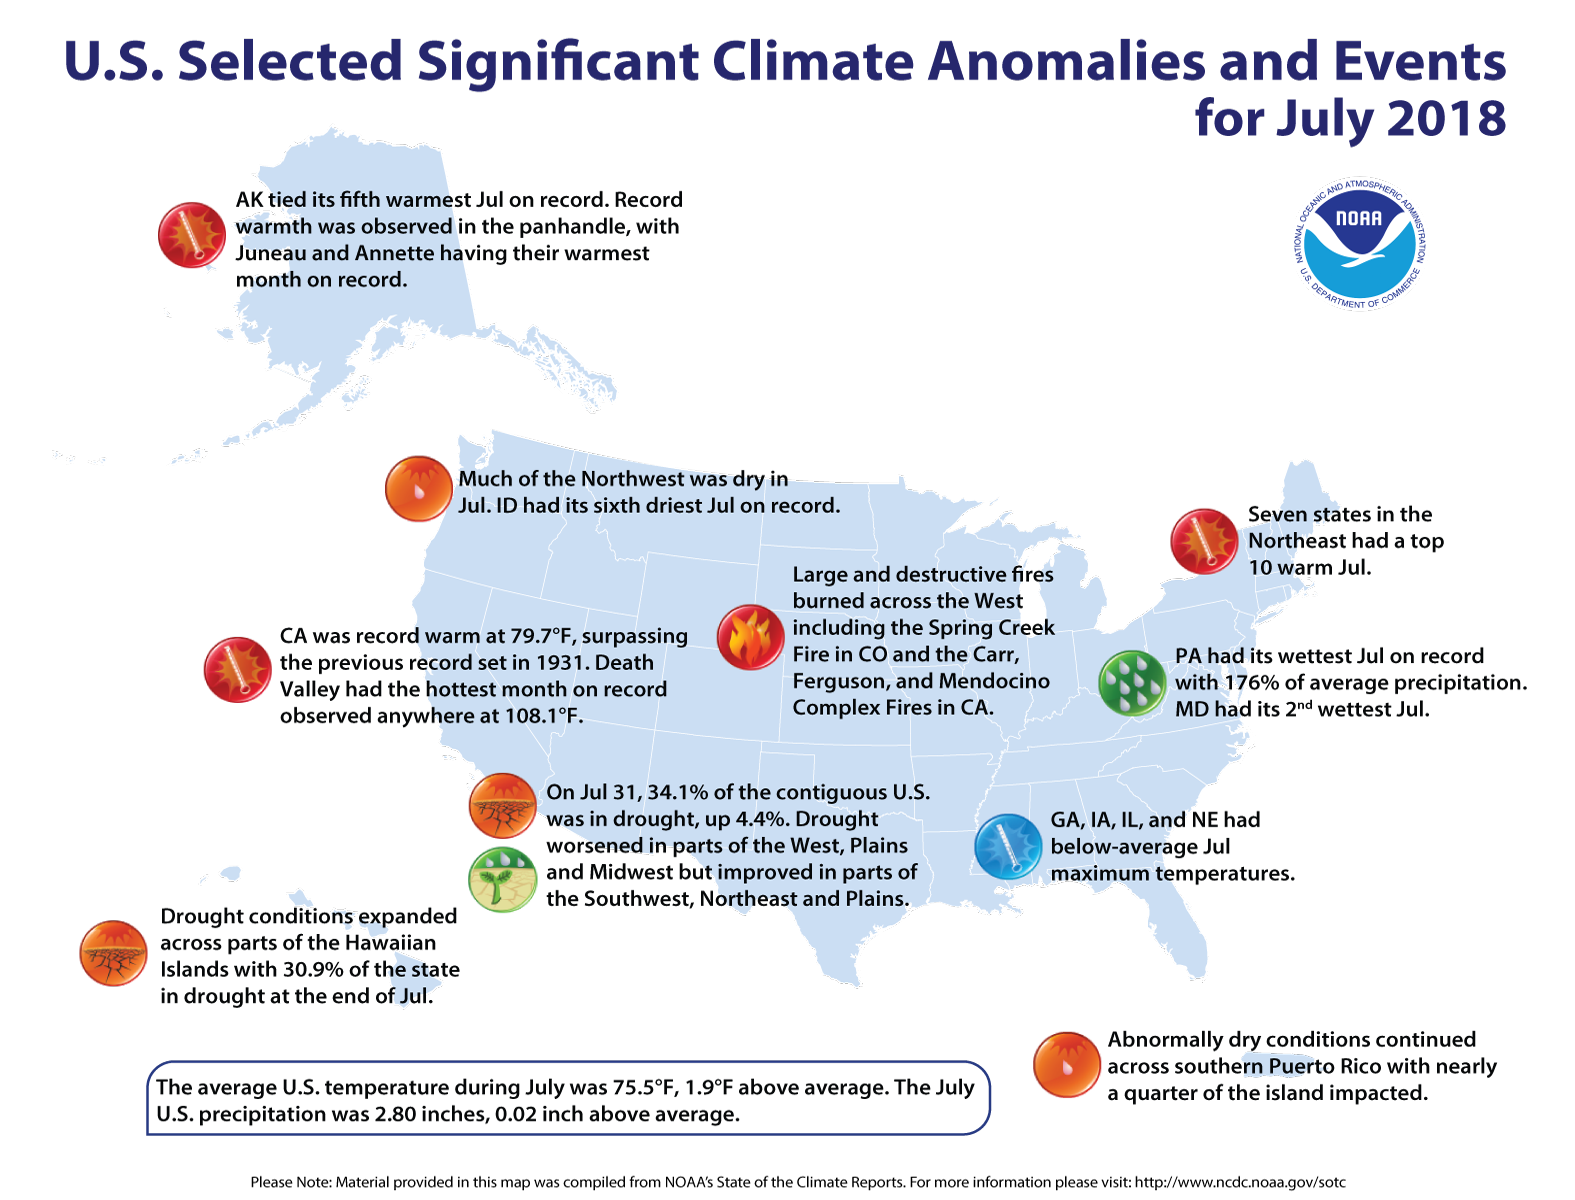 An annotated map of the United States showing notable climate events that occurred in July 2018. For details, see the bulleted list below in our story and online at .http://bit.ly/USClimate201807.